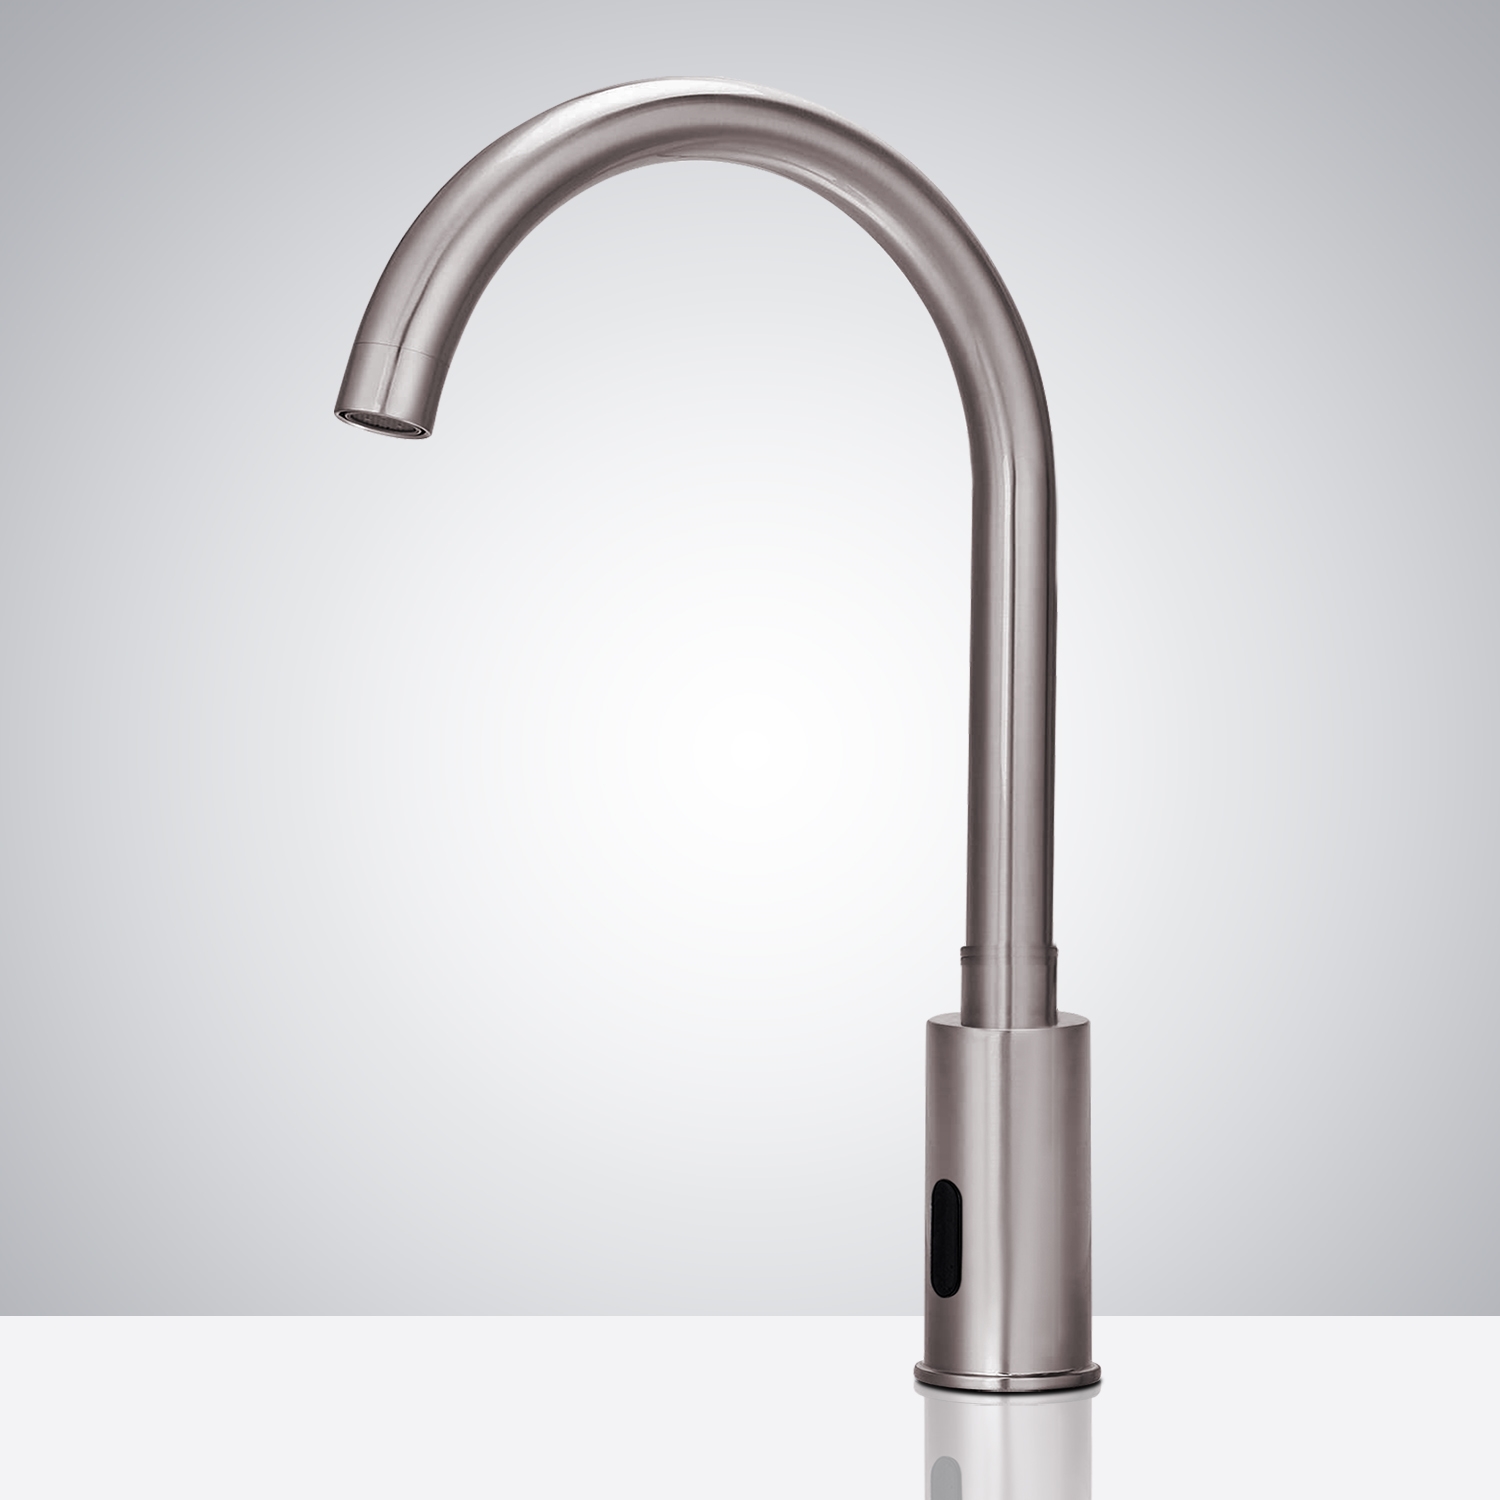 BathSelect Wella Goose Neck Brushed Nickel Automatic Commercial Sensor Faucet - (Also Available In Oil Rubbed Bronze Or Gold Tone)